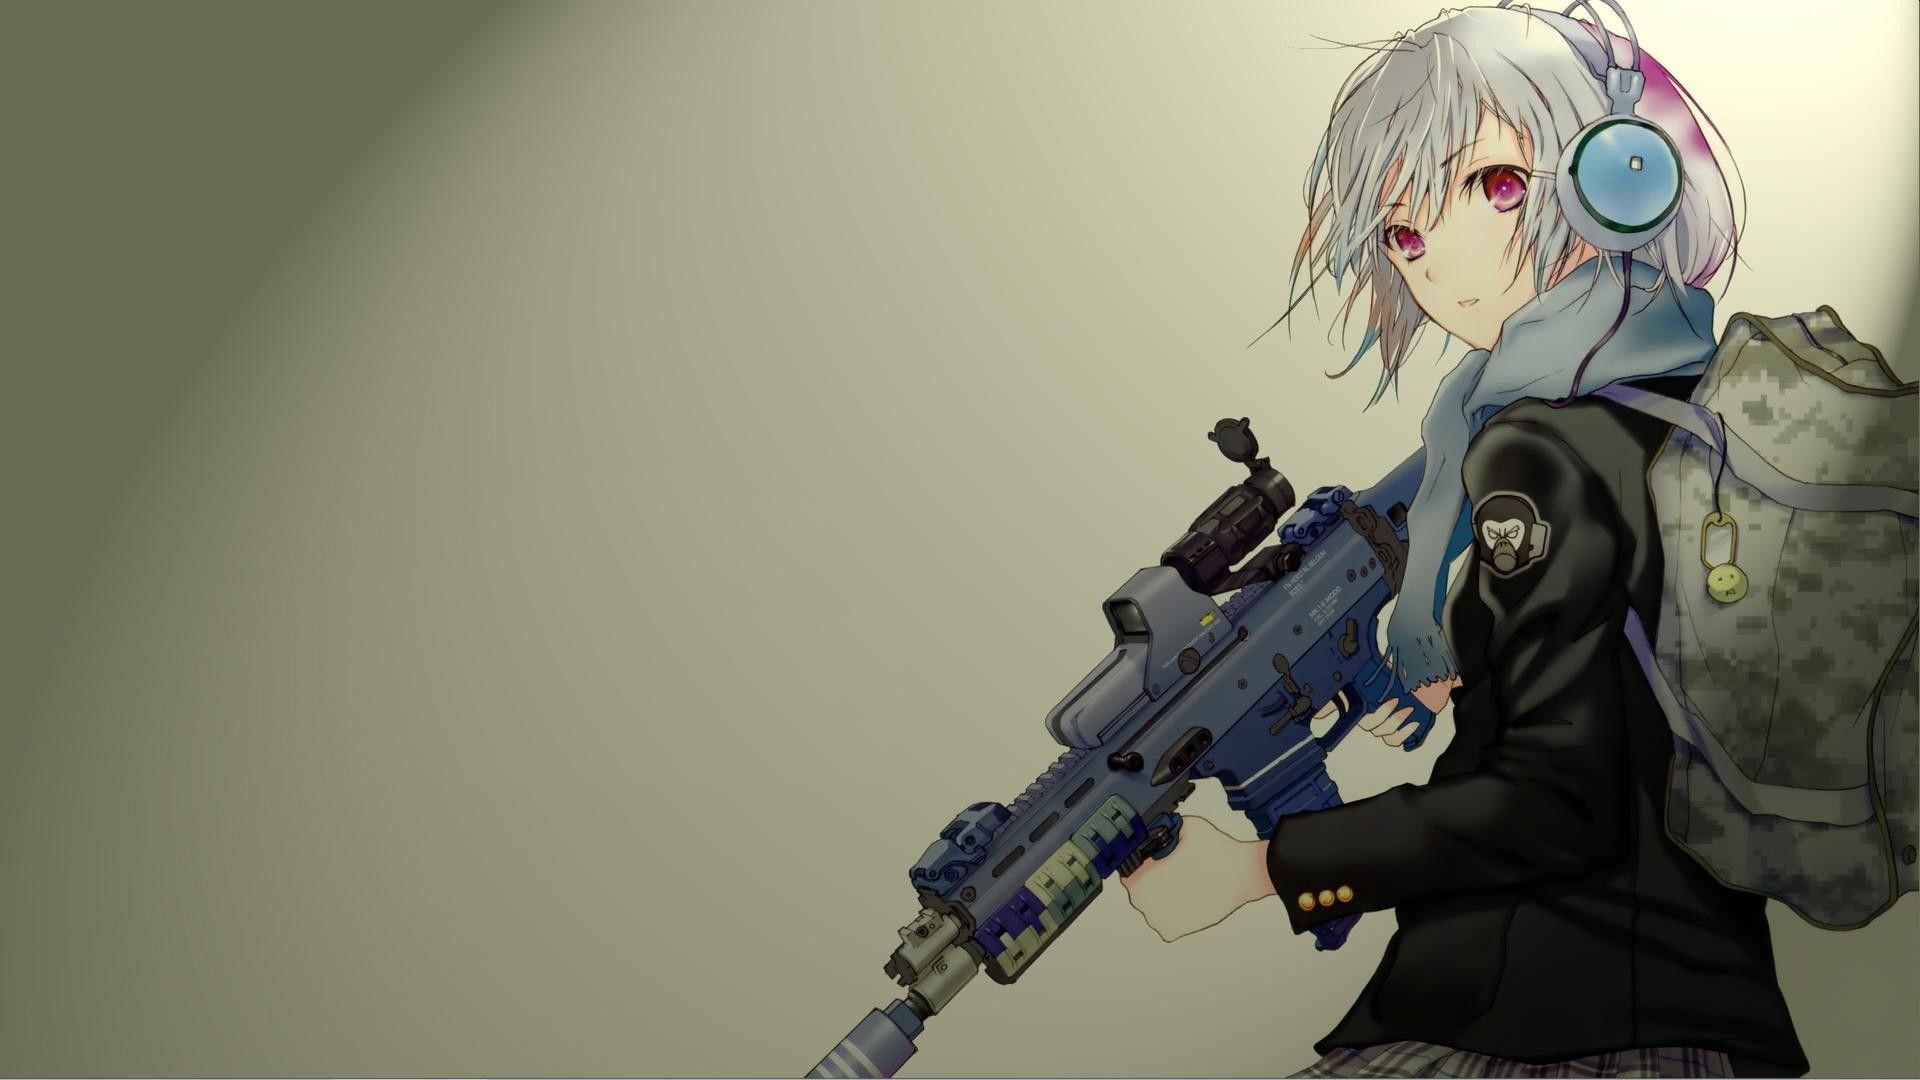 Transparent Anime Girl With Gun Png  Cosplay Costume For Girls Png  Download  Transparent Png Image  PNGitem